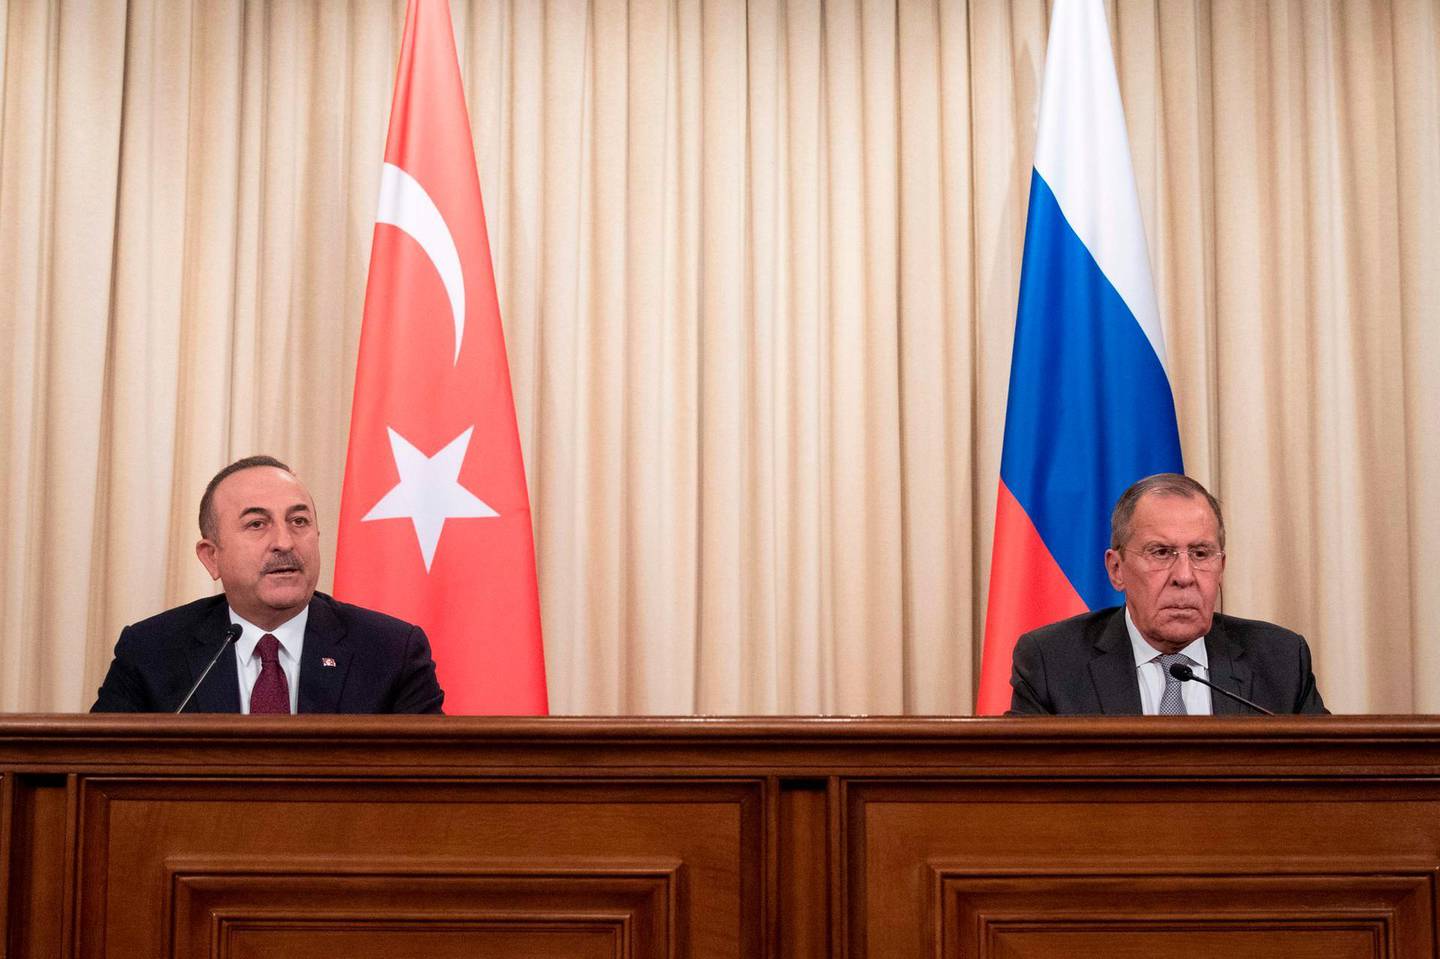 Russian Foreign Minister Sergei Lavrov and his Turkish counterpart Mevlut Cavusoglu hold a joint press conference following the talks on a ceasefire deal between the warring sides in Libya, in Moscow on January 13, 2020. / AFP / POOL / Pavel Golovkin
